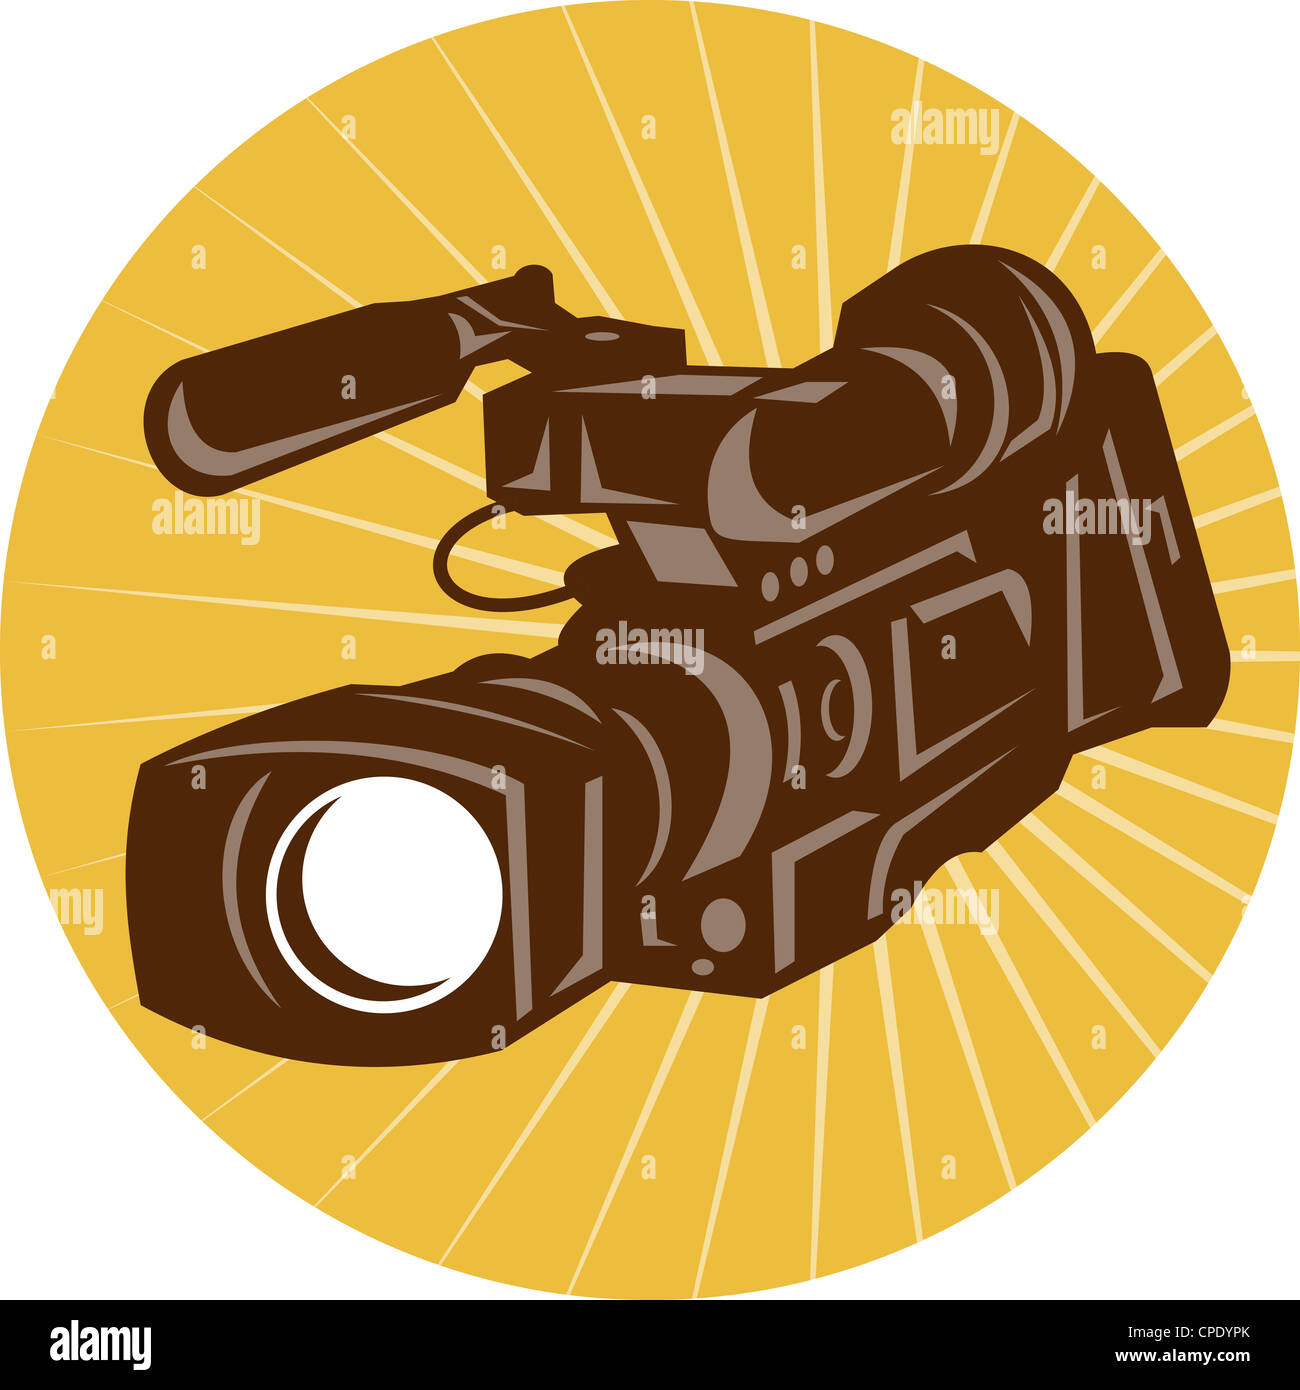 Illustration of a professional video camera camcorder recorder done in retro style set inside circle. Stock Photo